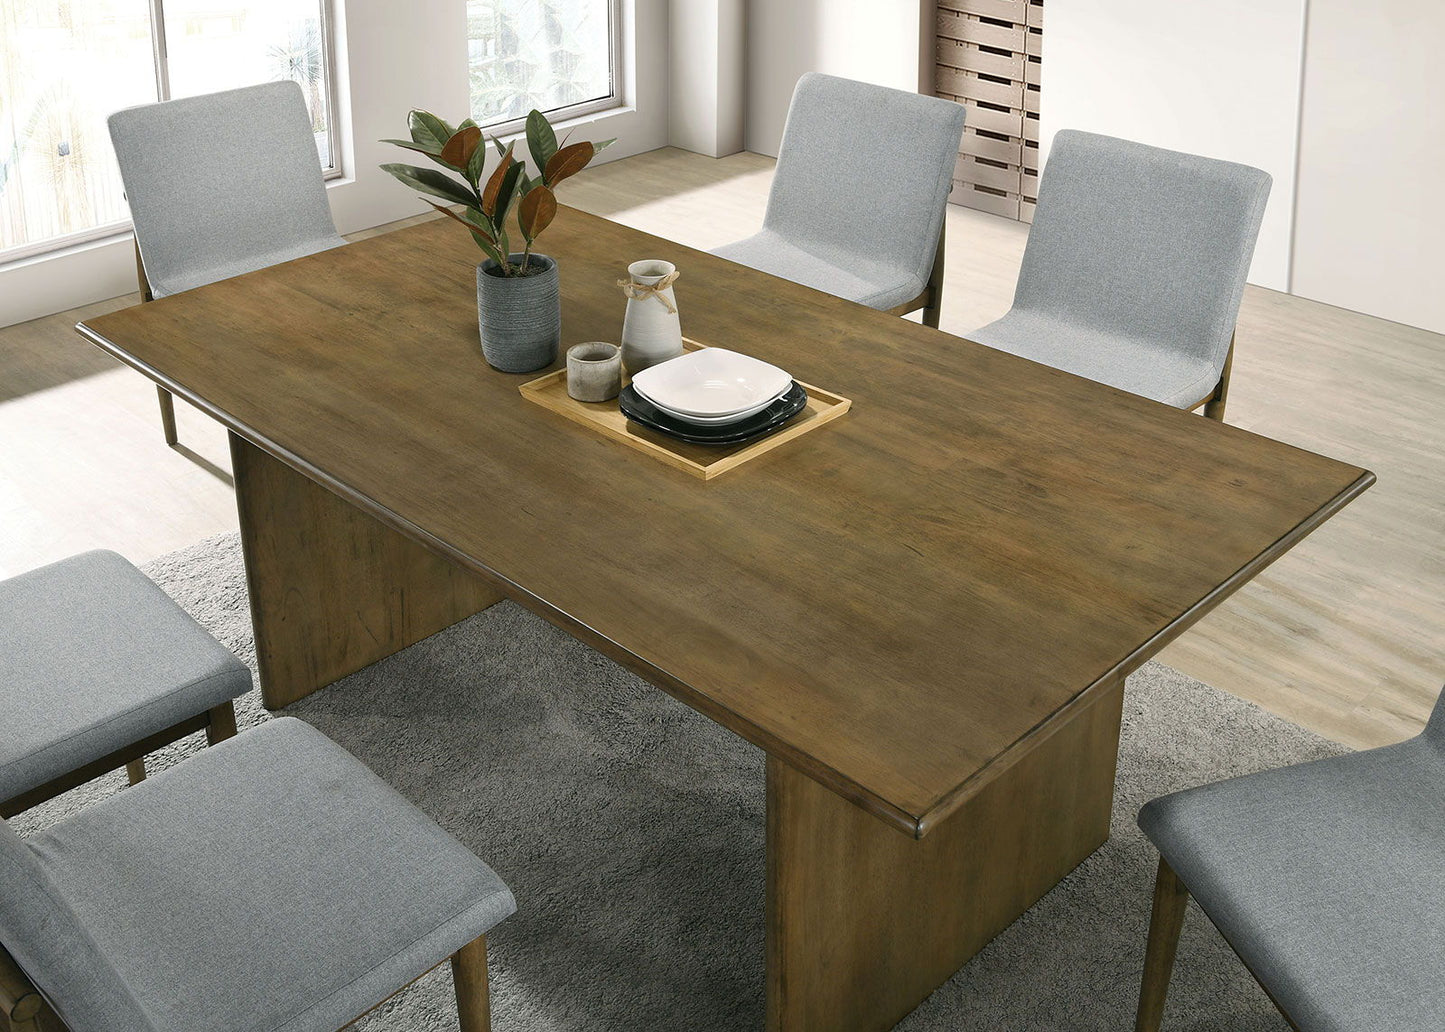 St Gallen - Dining Table - Natural Tone